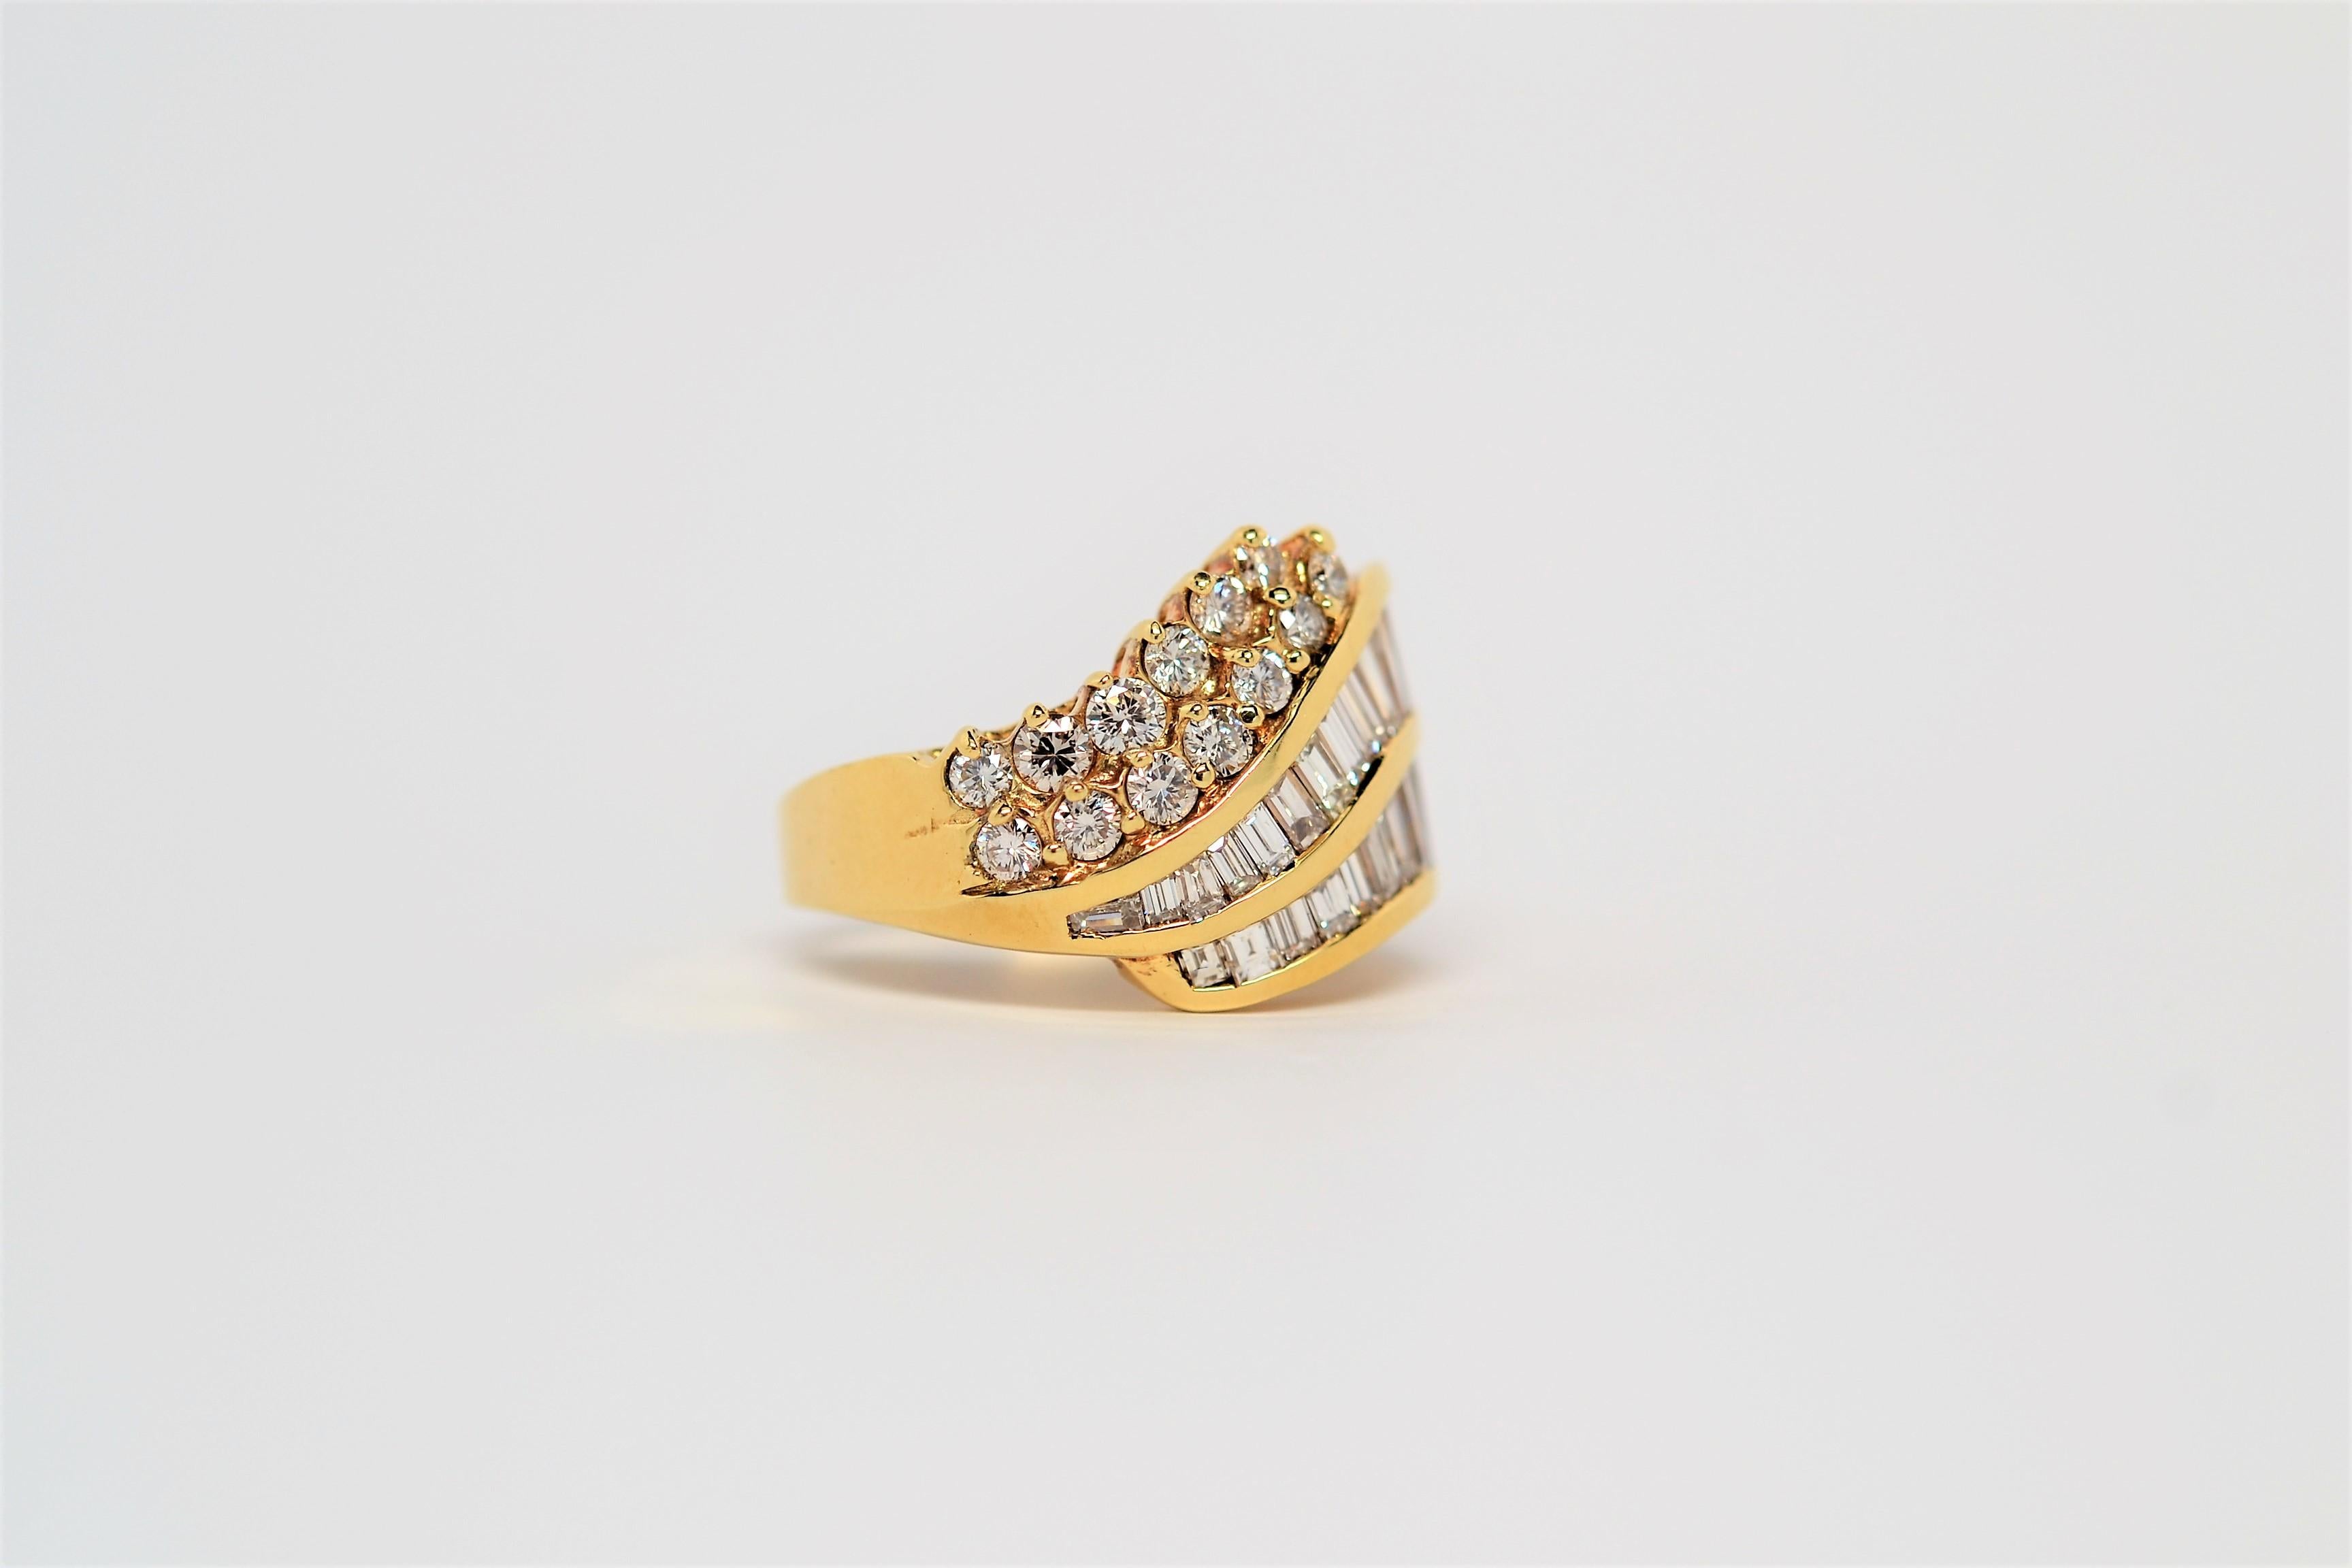 A beautifully made diamond ring set in 18K Yellow Gold with Baguette and Round Brilliant Cut Diamonds. This custom design has four rows of diamonds in a flowing layout and tapers in size from end to end. Two rows of Baguette Diamonds are channel set